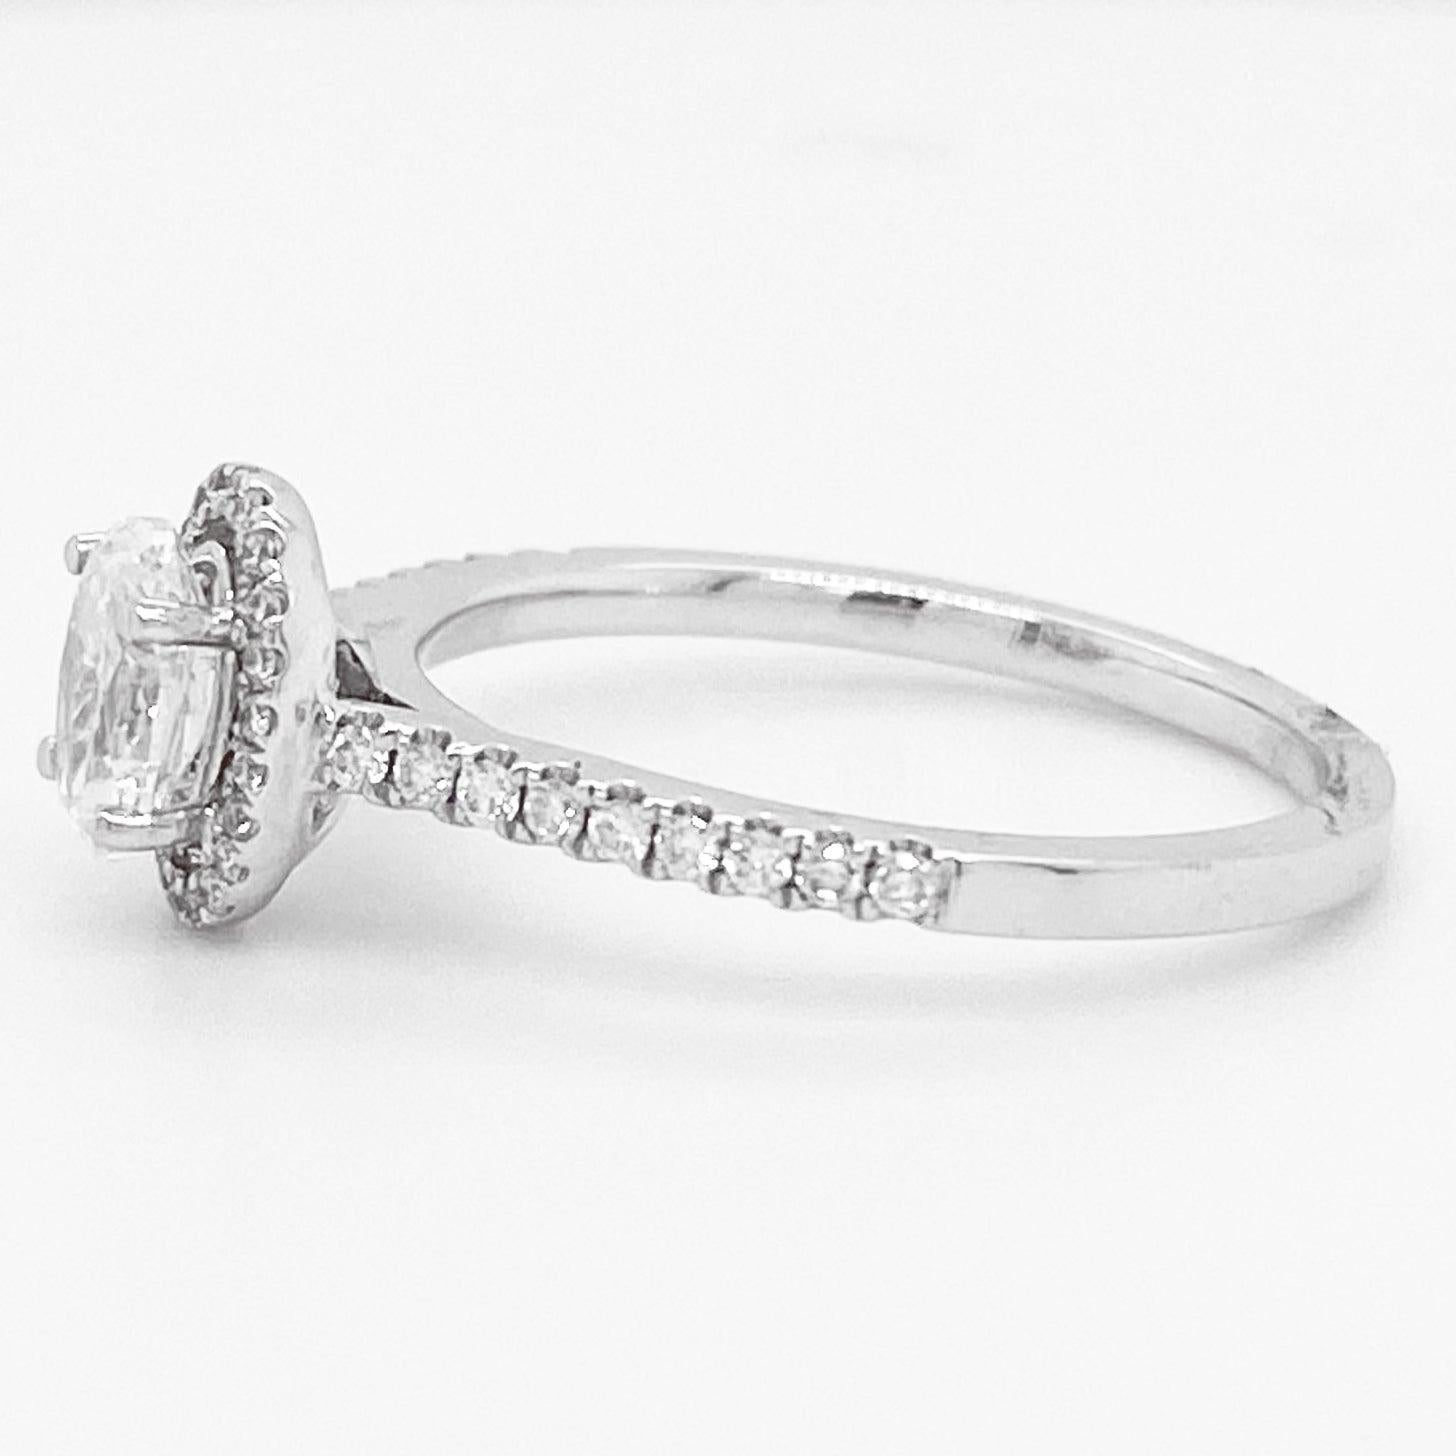 For Sale:  Oval Diamond Ring, White Gold, .72 Carat Diamond Oval Halo Engagement Ring 3